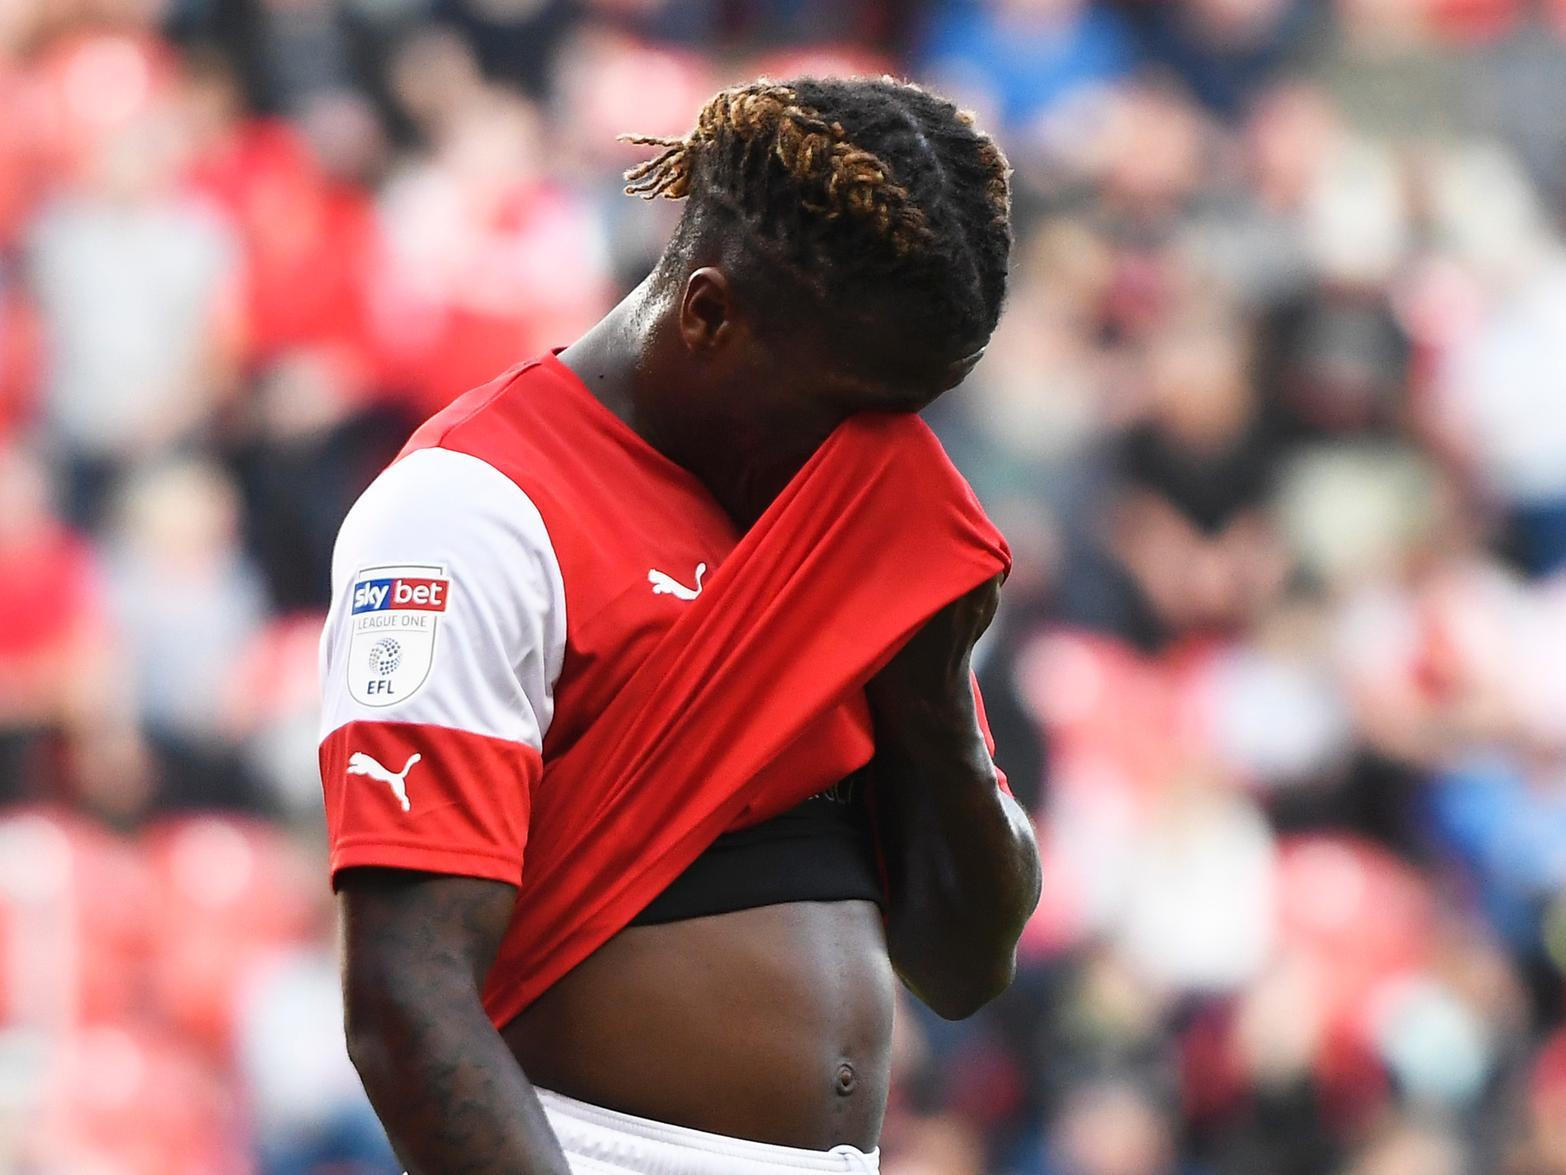 Rotherham United have confirmed Akeem Hinds has parted ways with the club after agreeing a mutual termination of his contract. (Various)